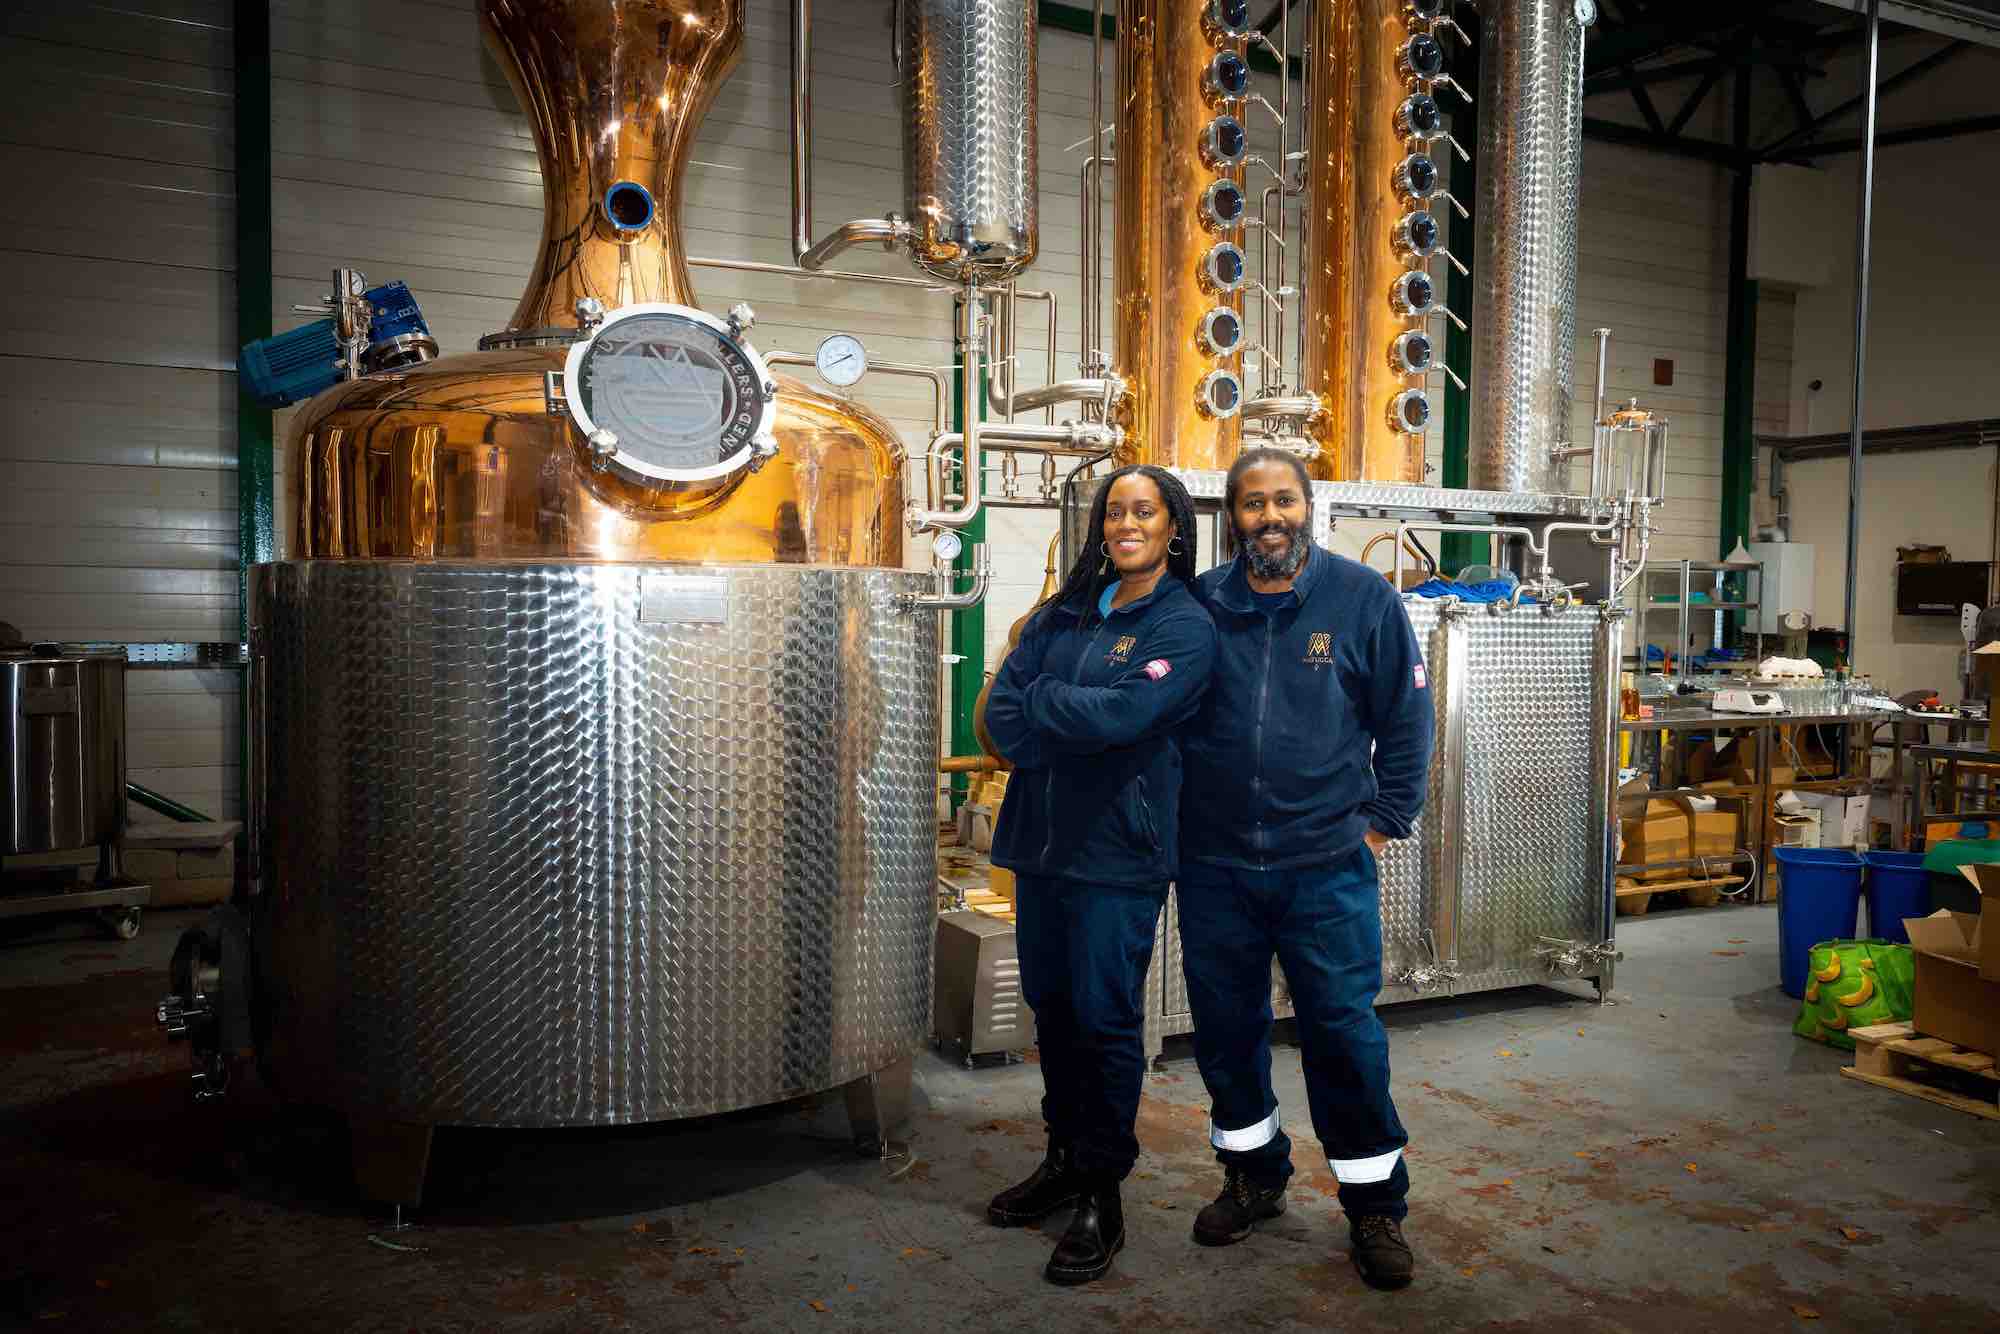 Scottish rum distiller launches private cask ownership offer